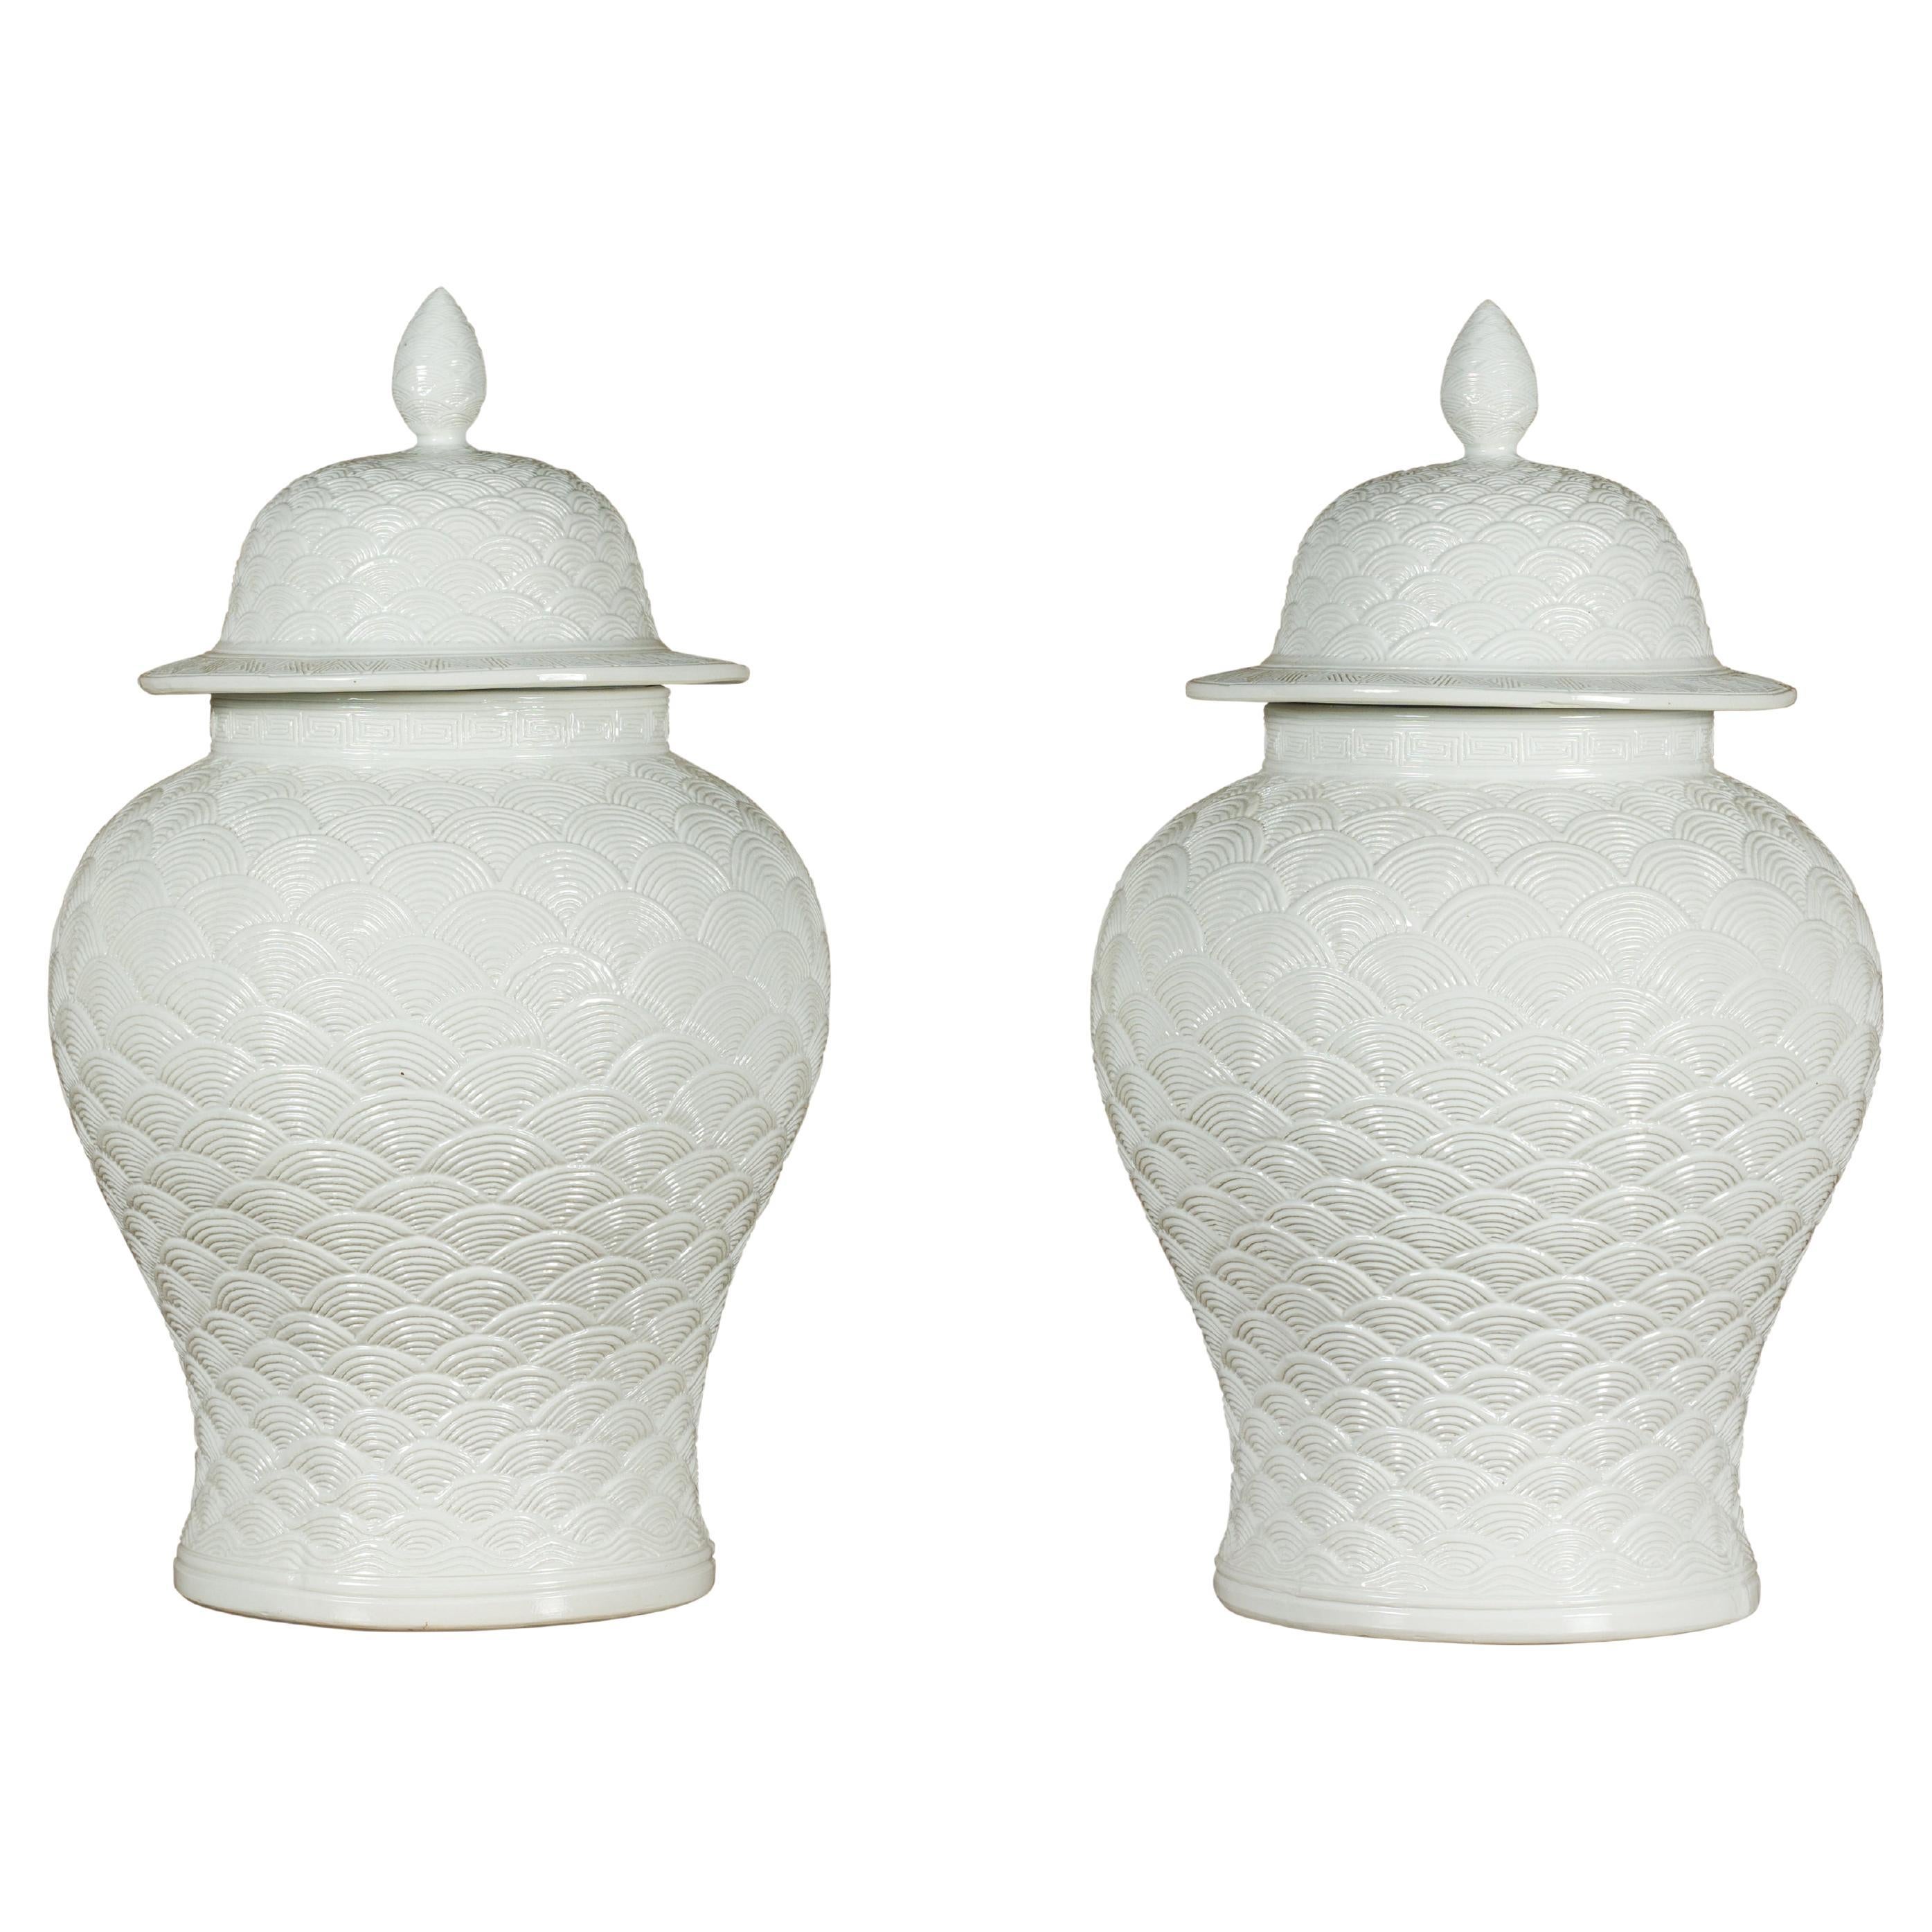 Pair of White Porcelain Fish Scale Lidded Jars with Petite Finials